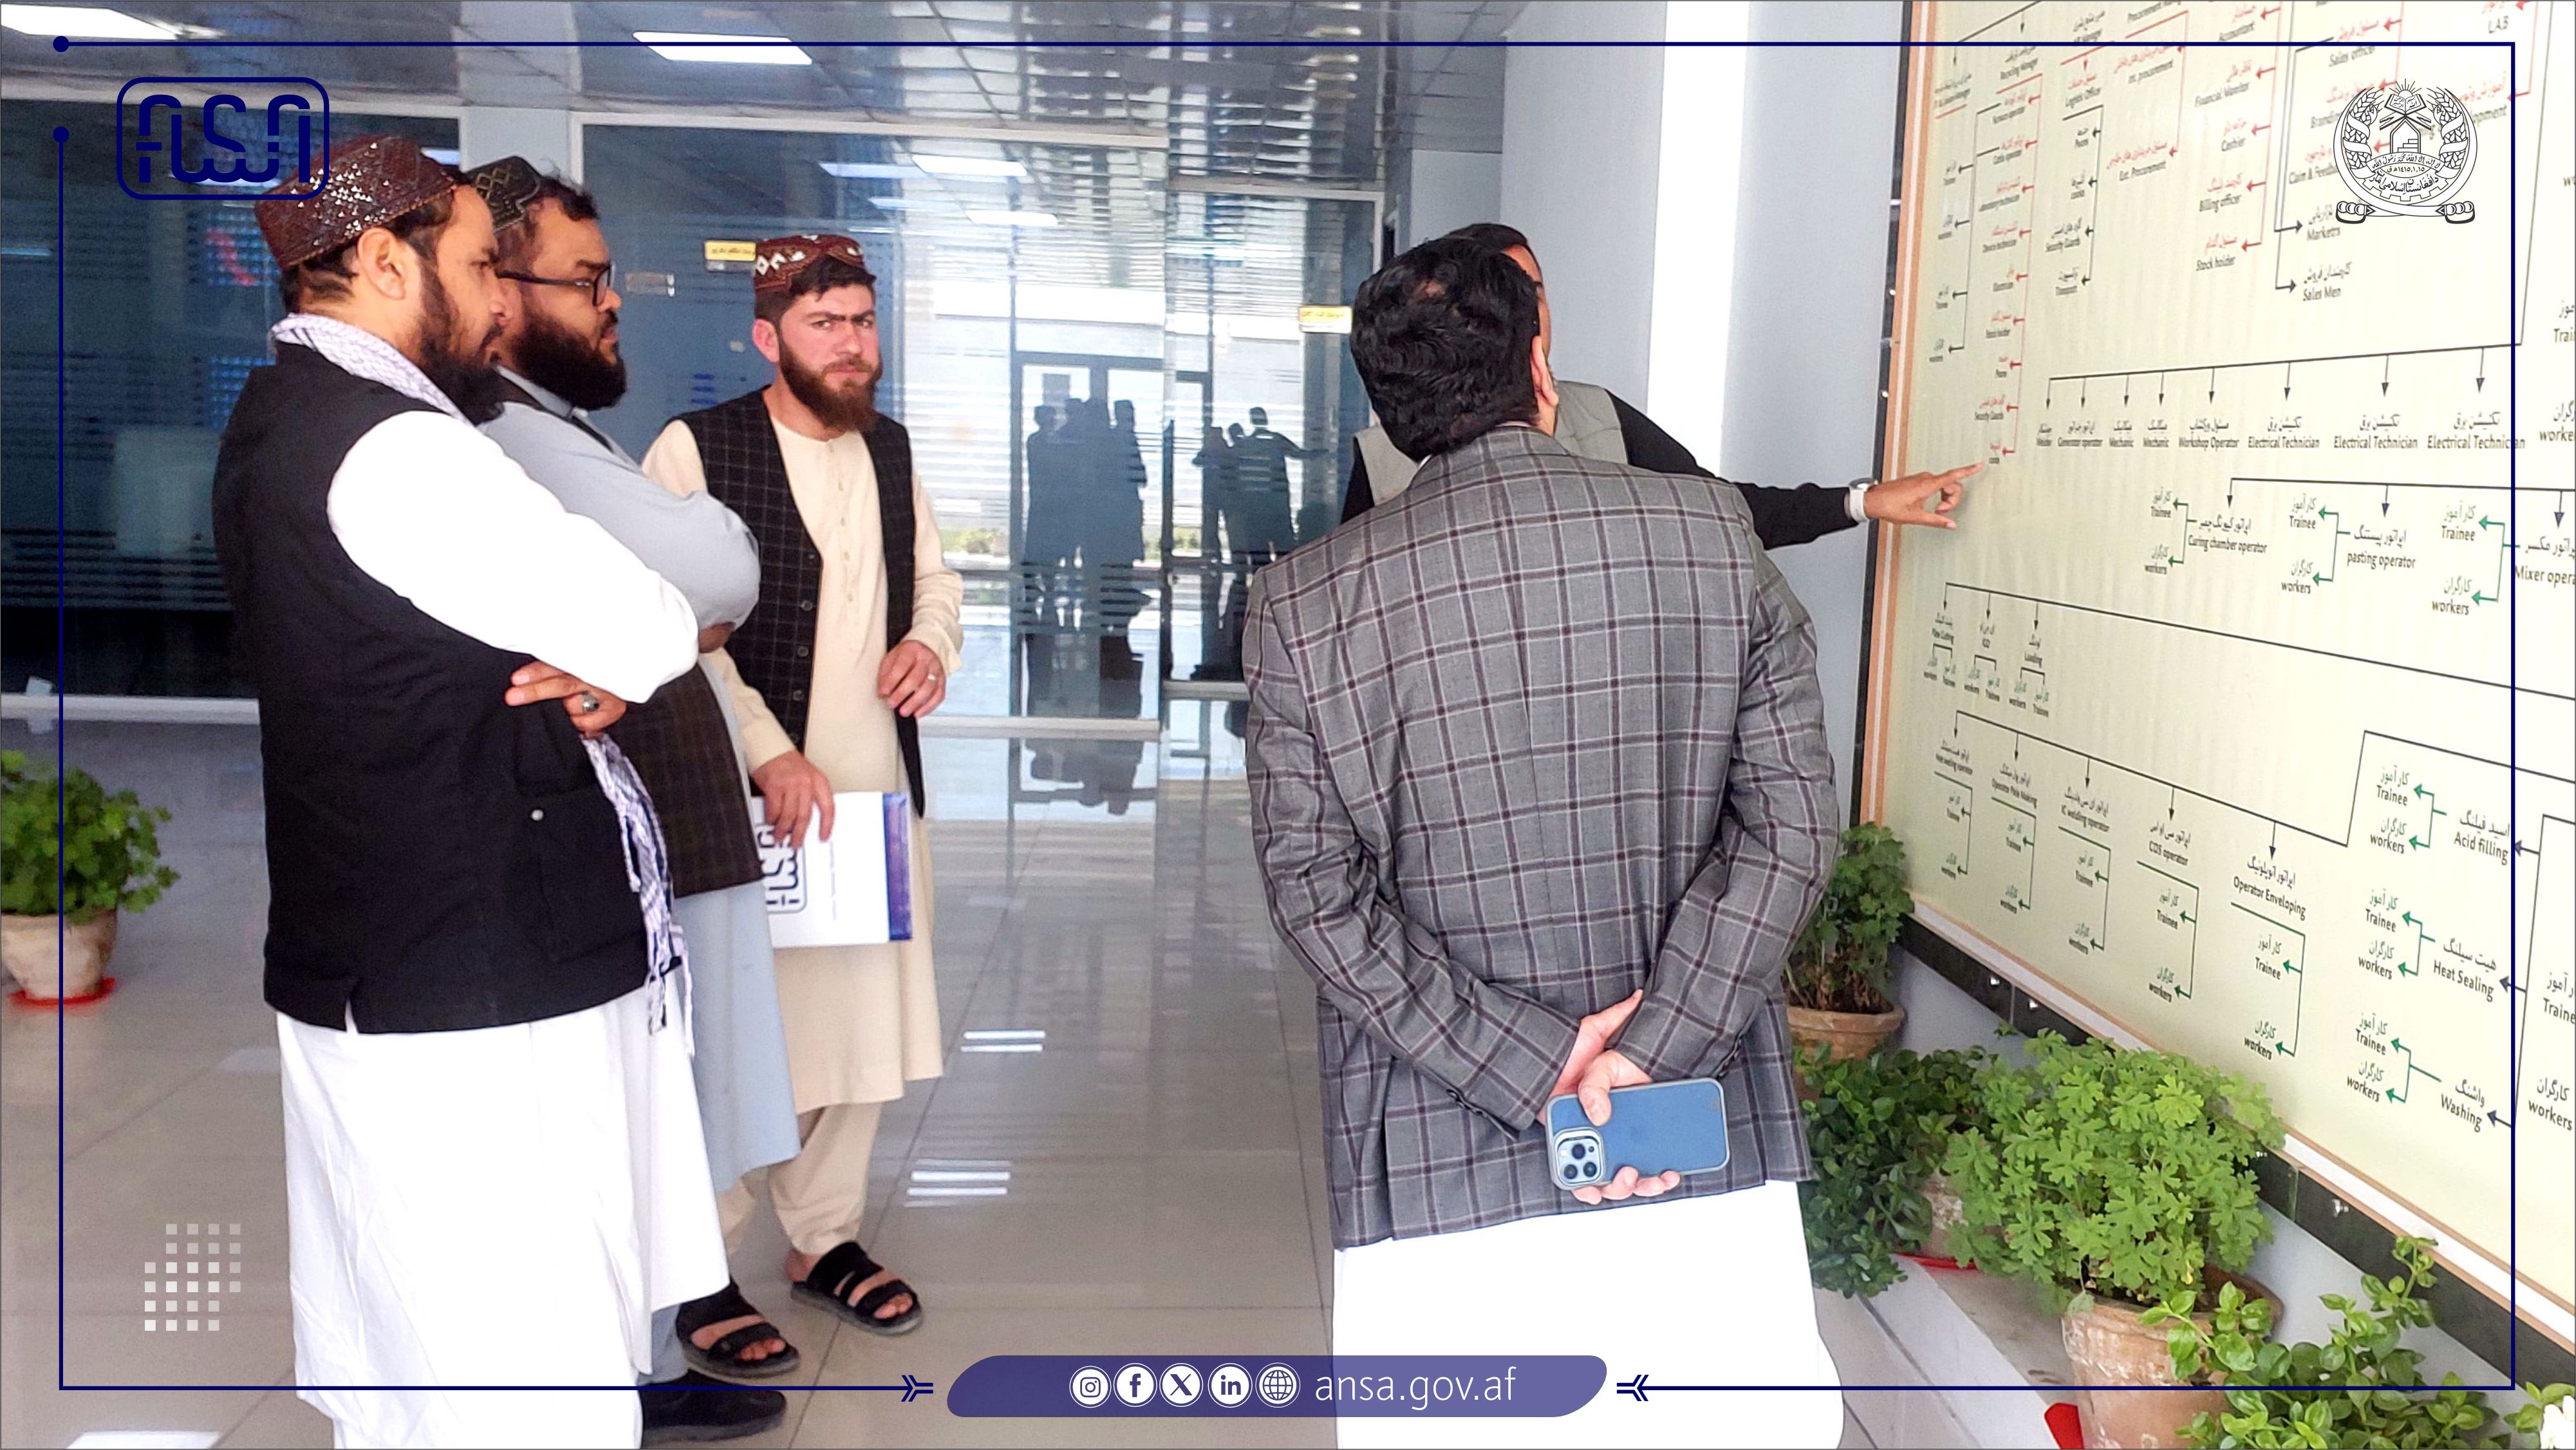 The monitoring process of the Afghanistan National Standards Authority is ongoing in order to standardize and raise the quality of the country's domestic products